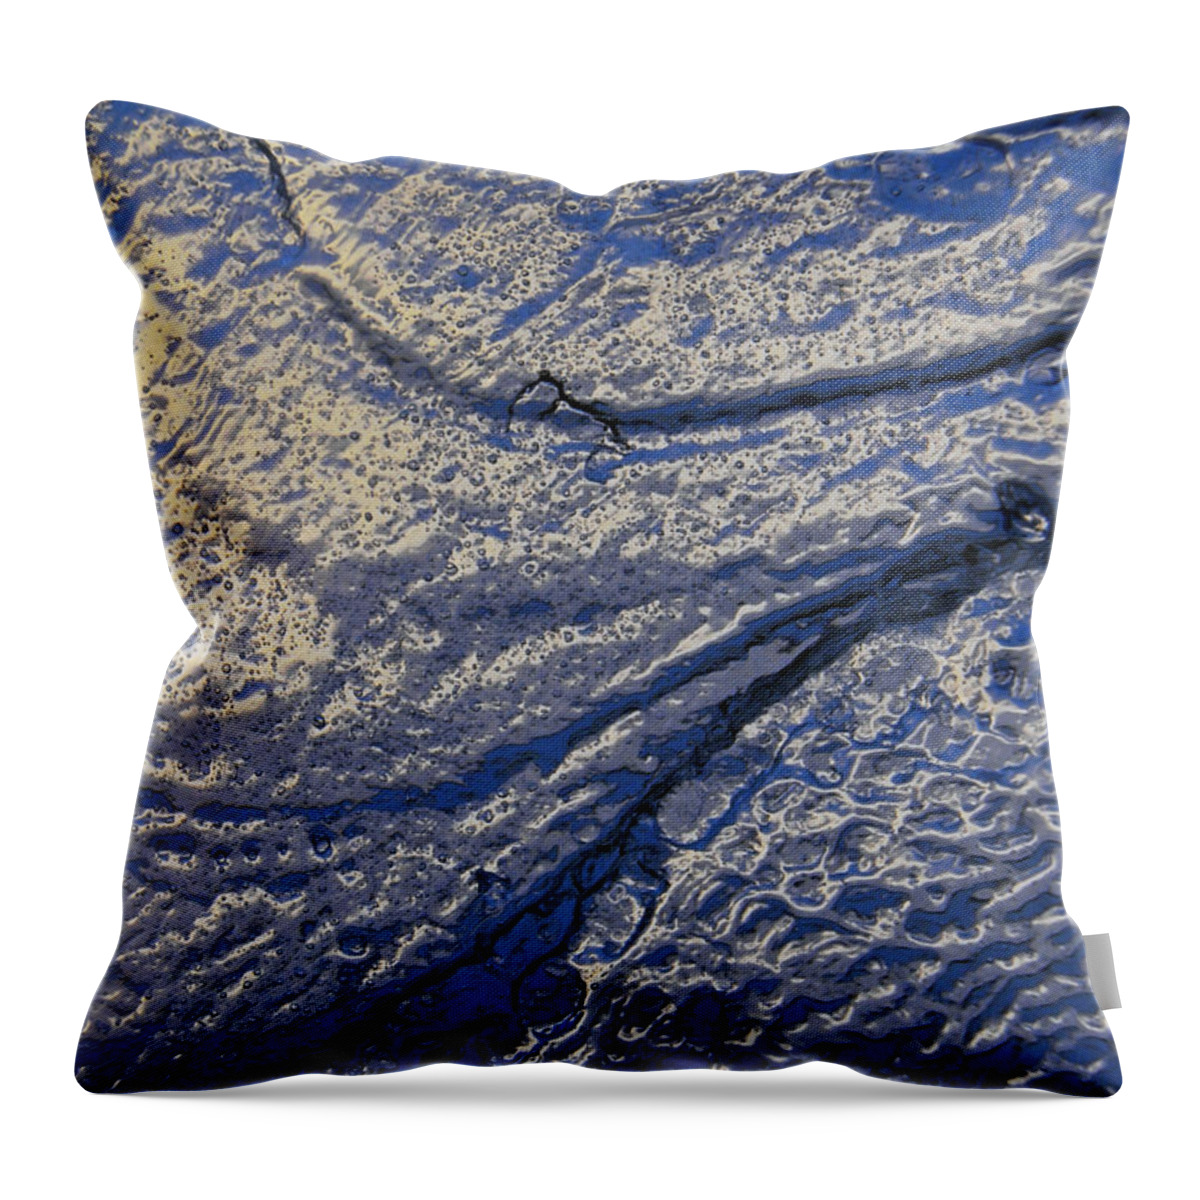 Curves Throw Pillow featuring the photograph Curves by Sami Tiainen